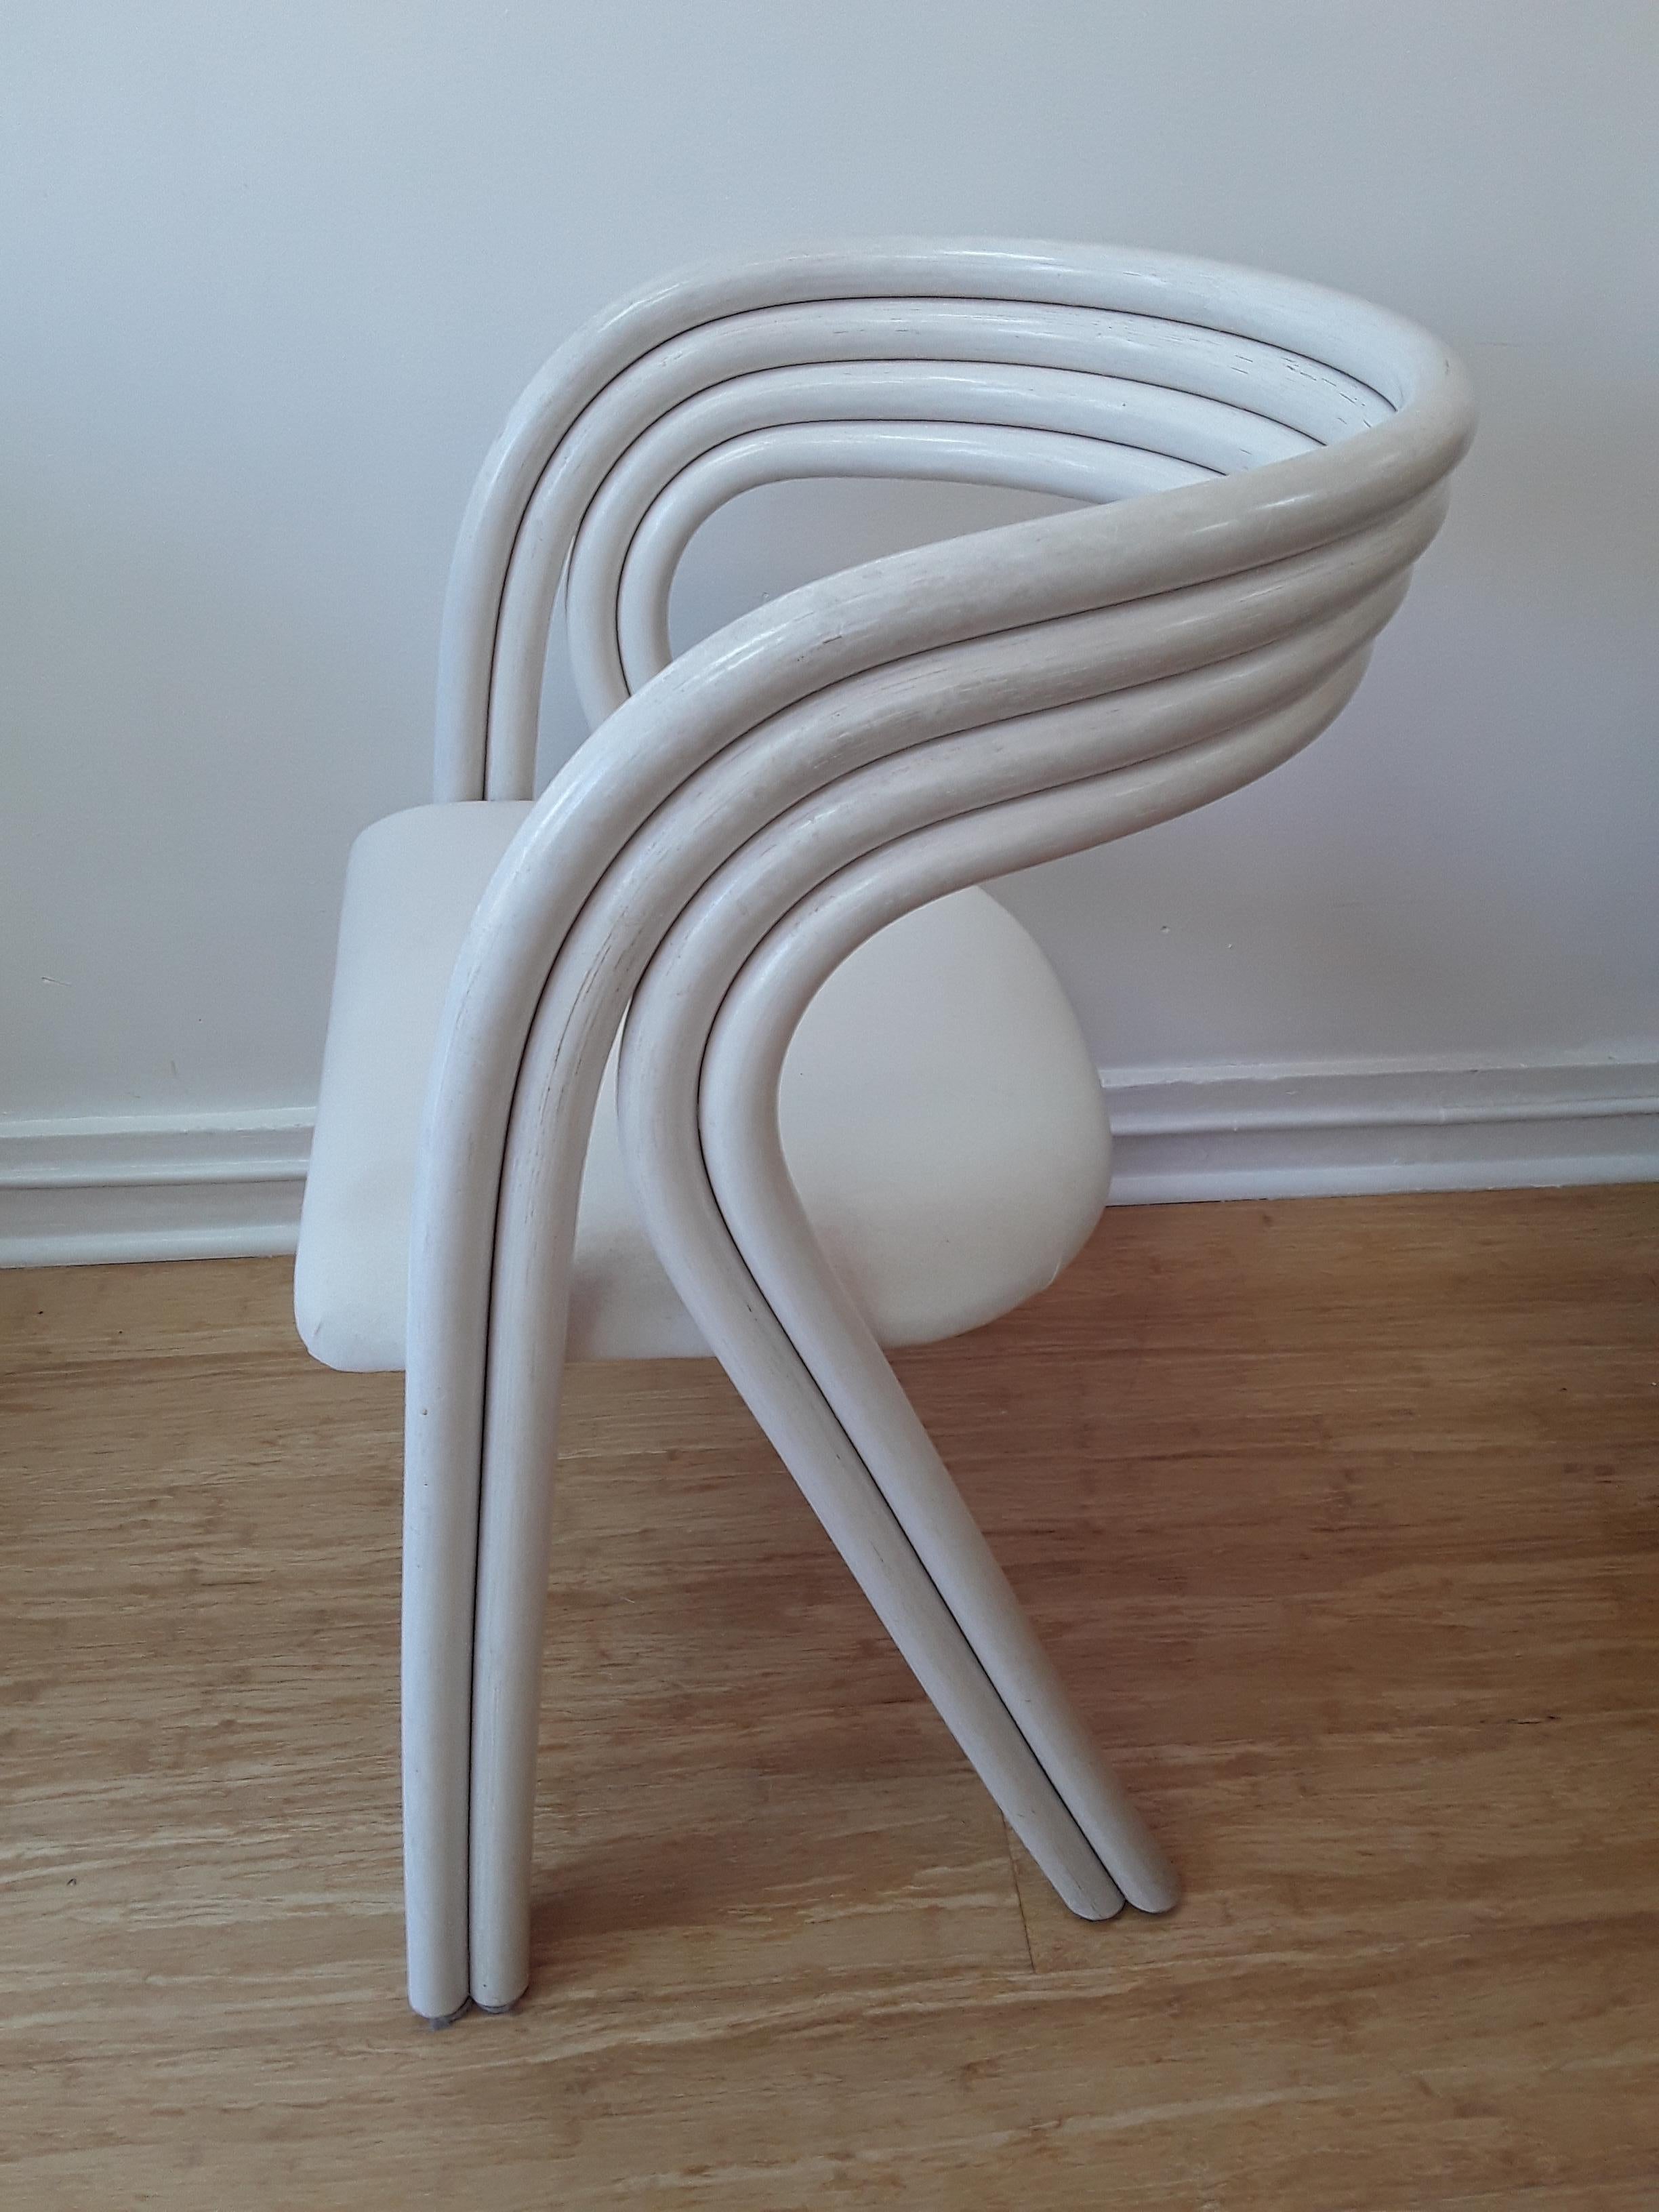 Set of 4 white painted Dutch bentwood armchairs by Jan des Bouvrie for Rohé Noordwolde.